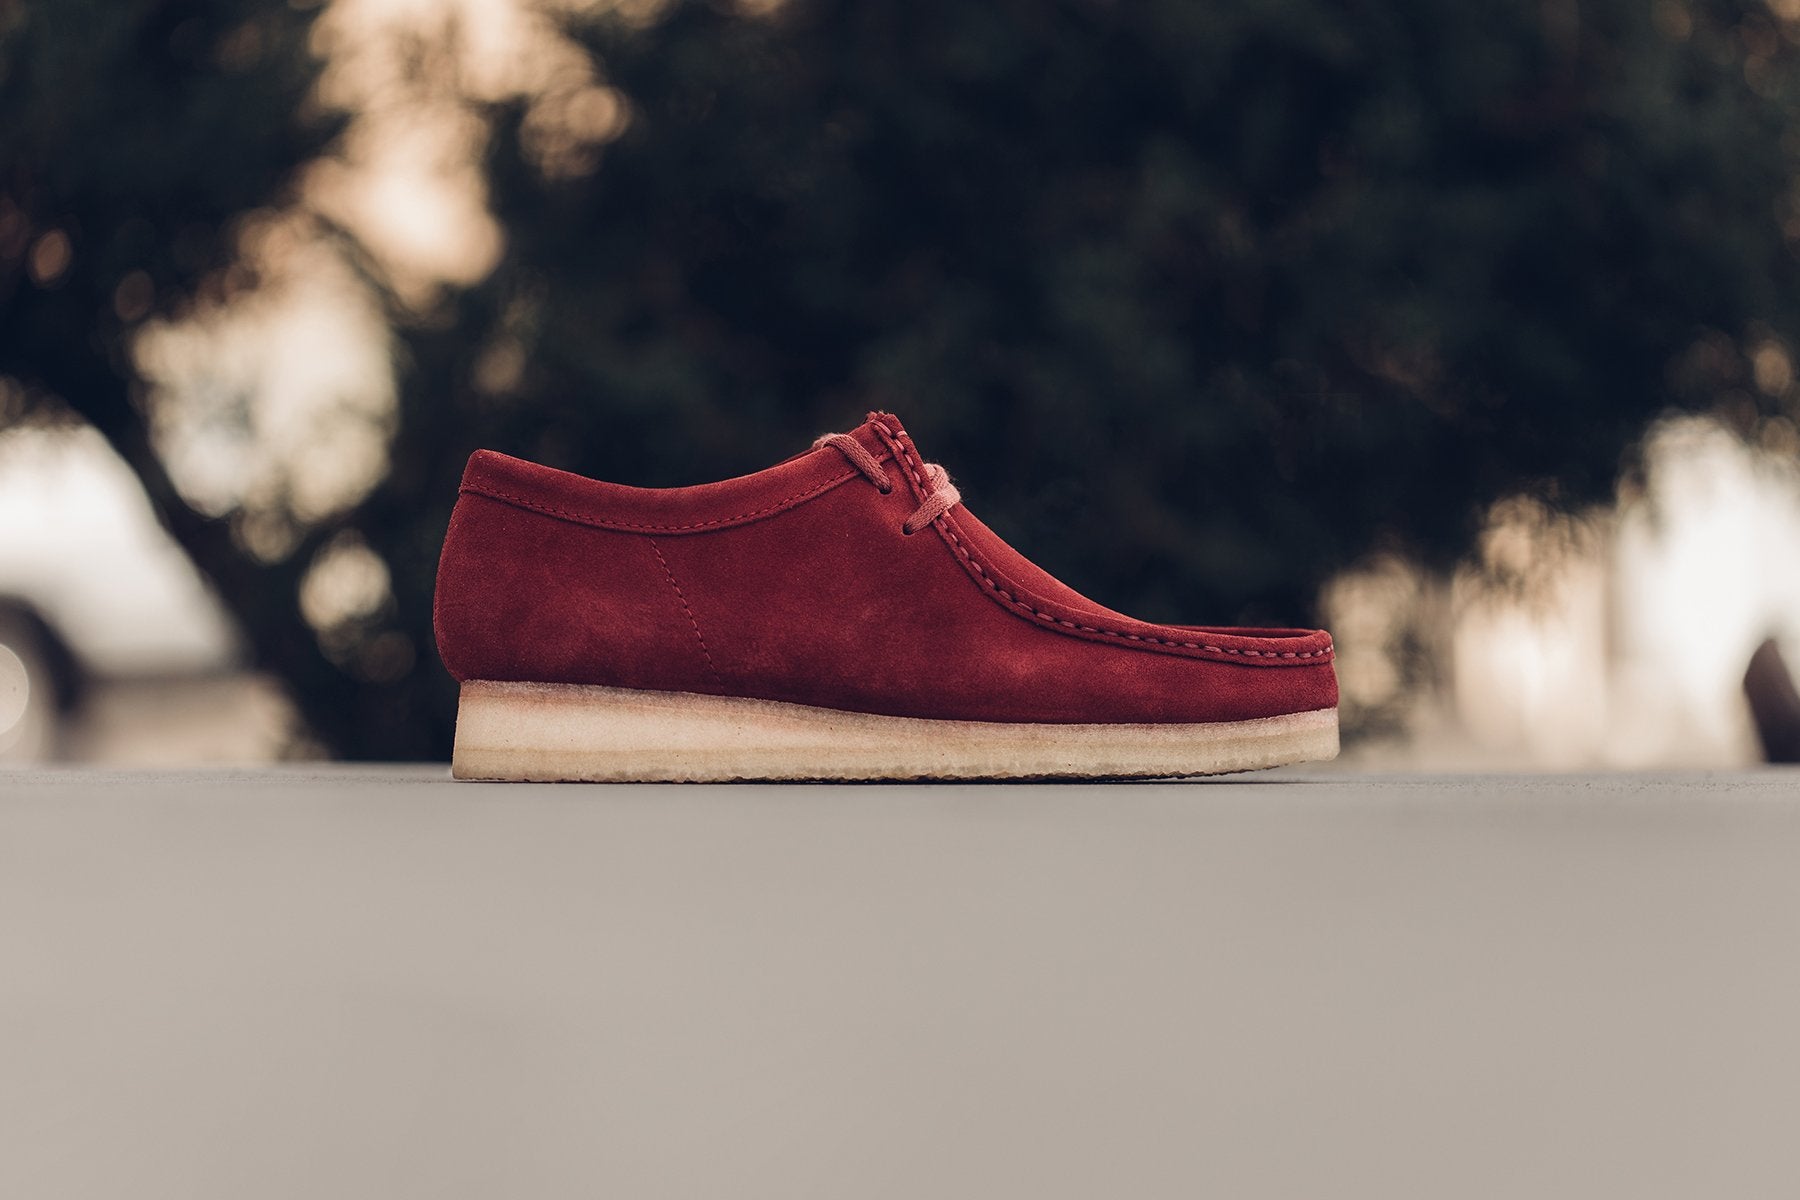 Clarks Wallabee Boot in Red Now Feature